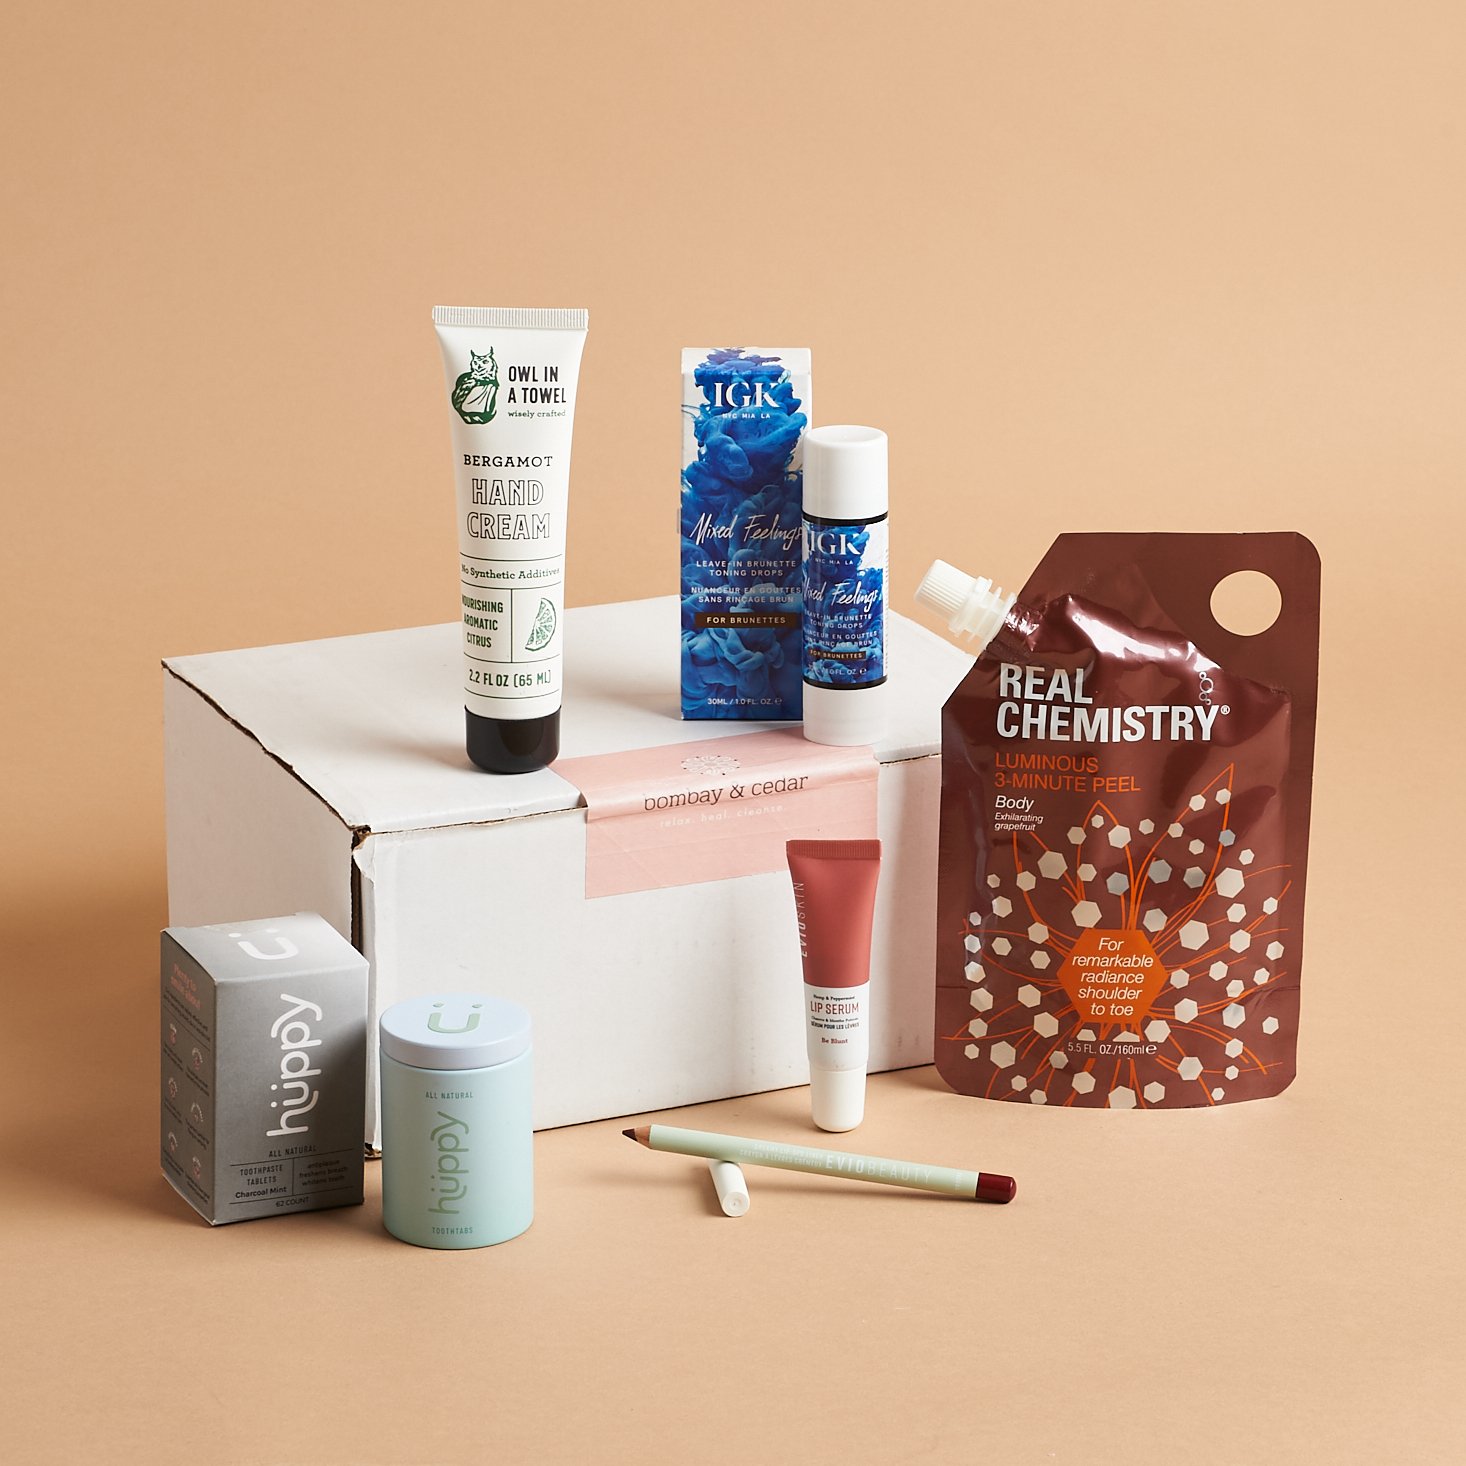 The Beauty Box by Bombay & Cedar “Vibrant” Review